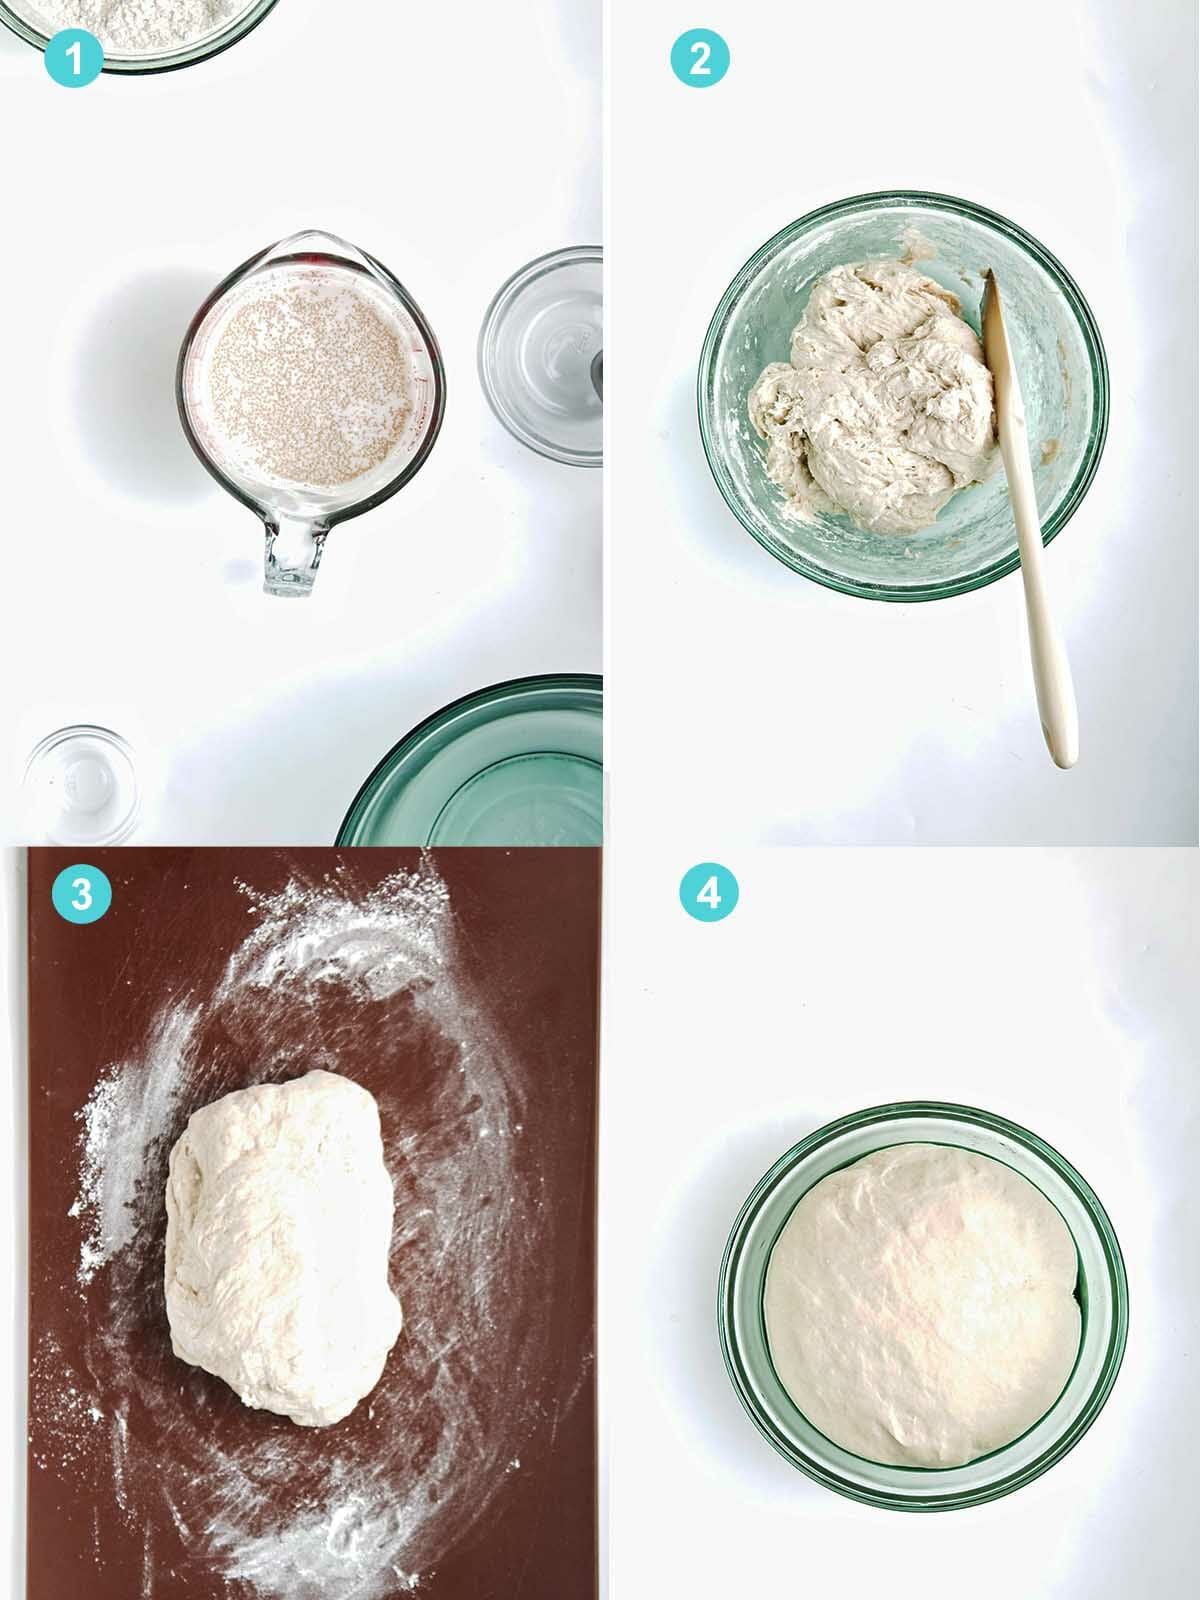 how to make